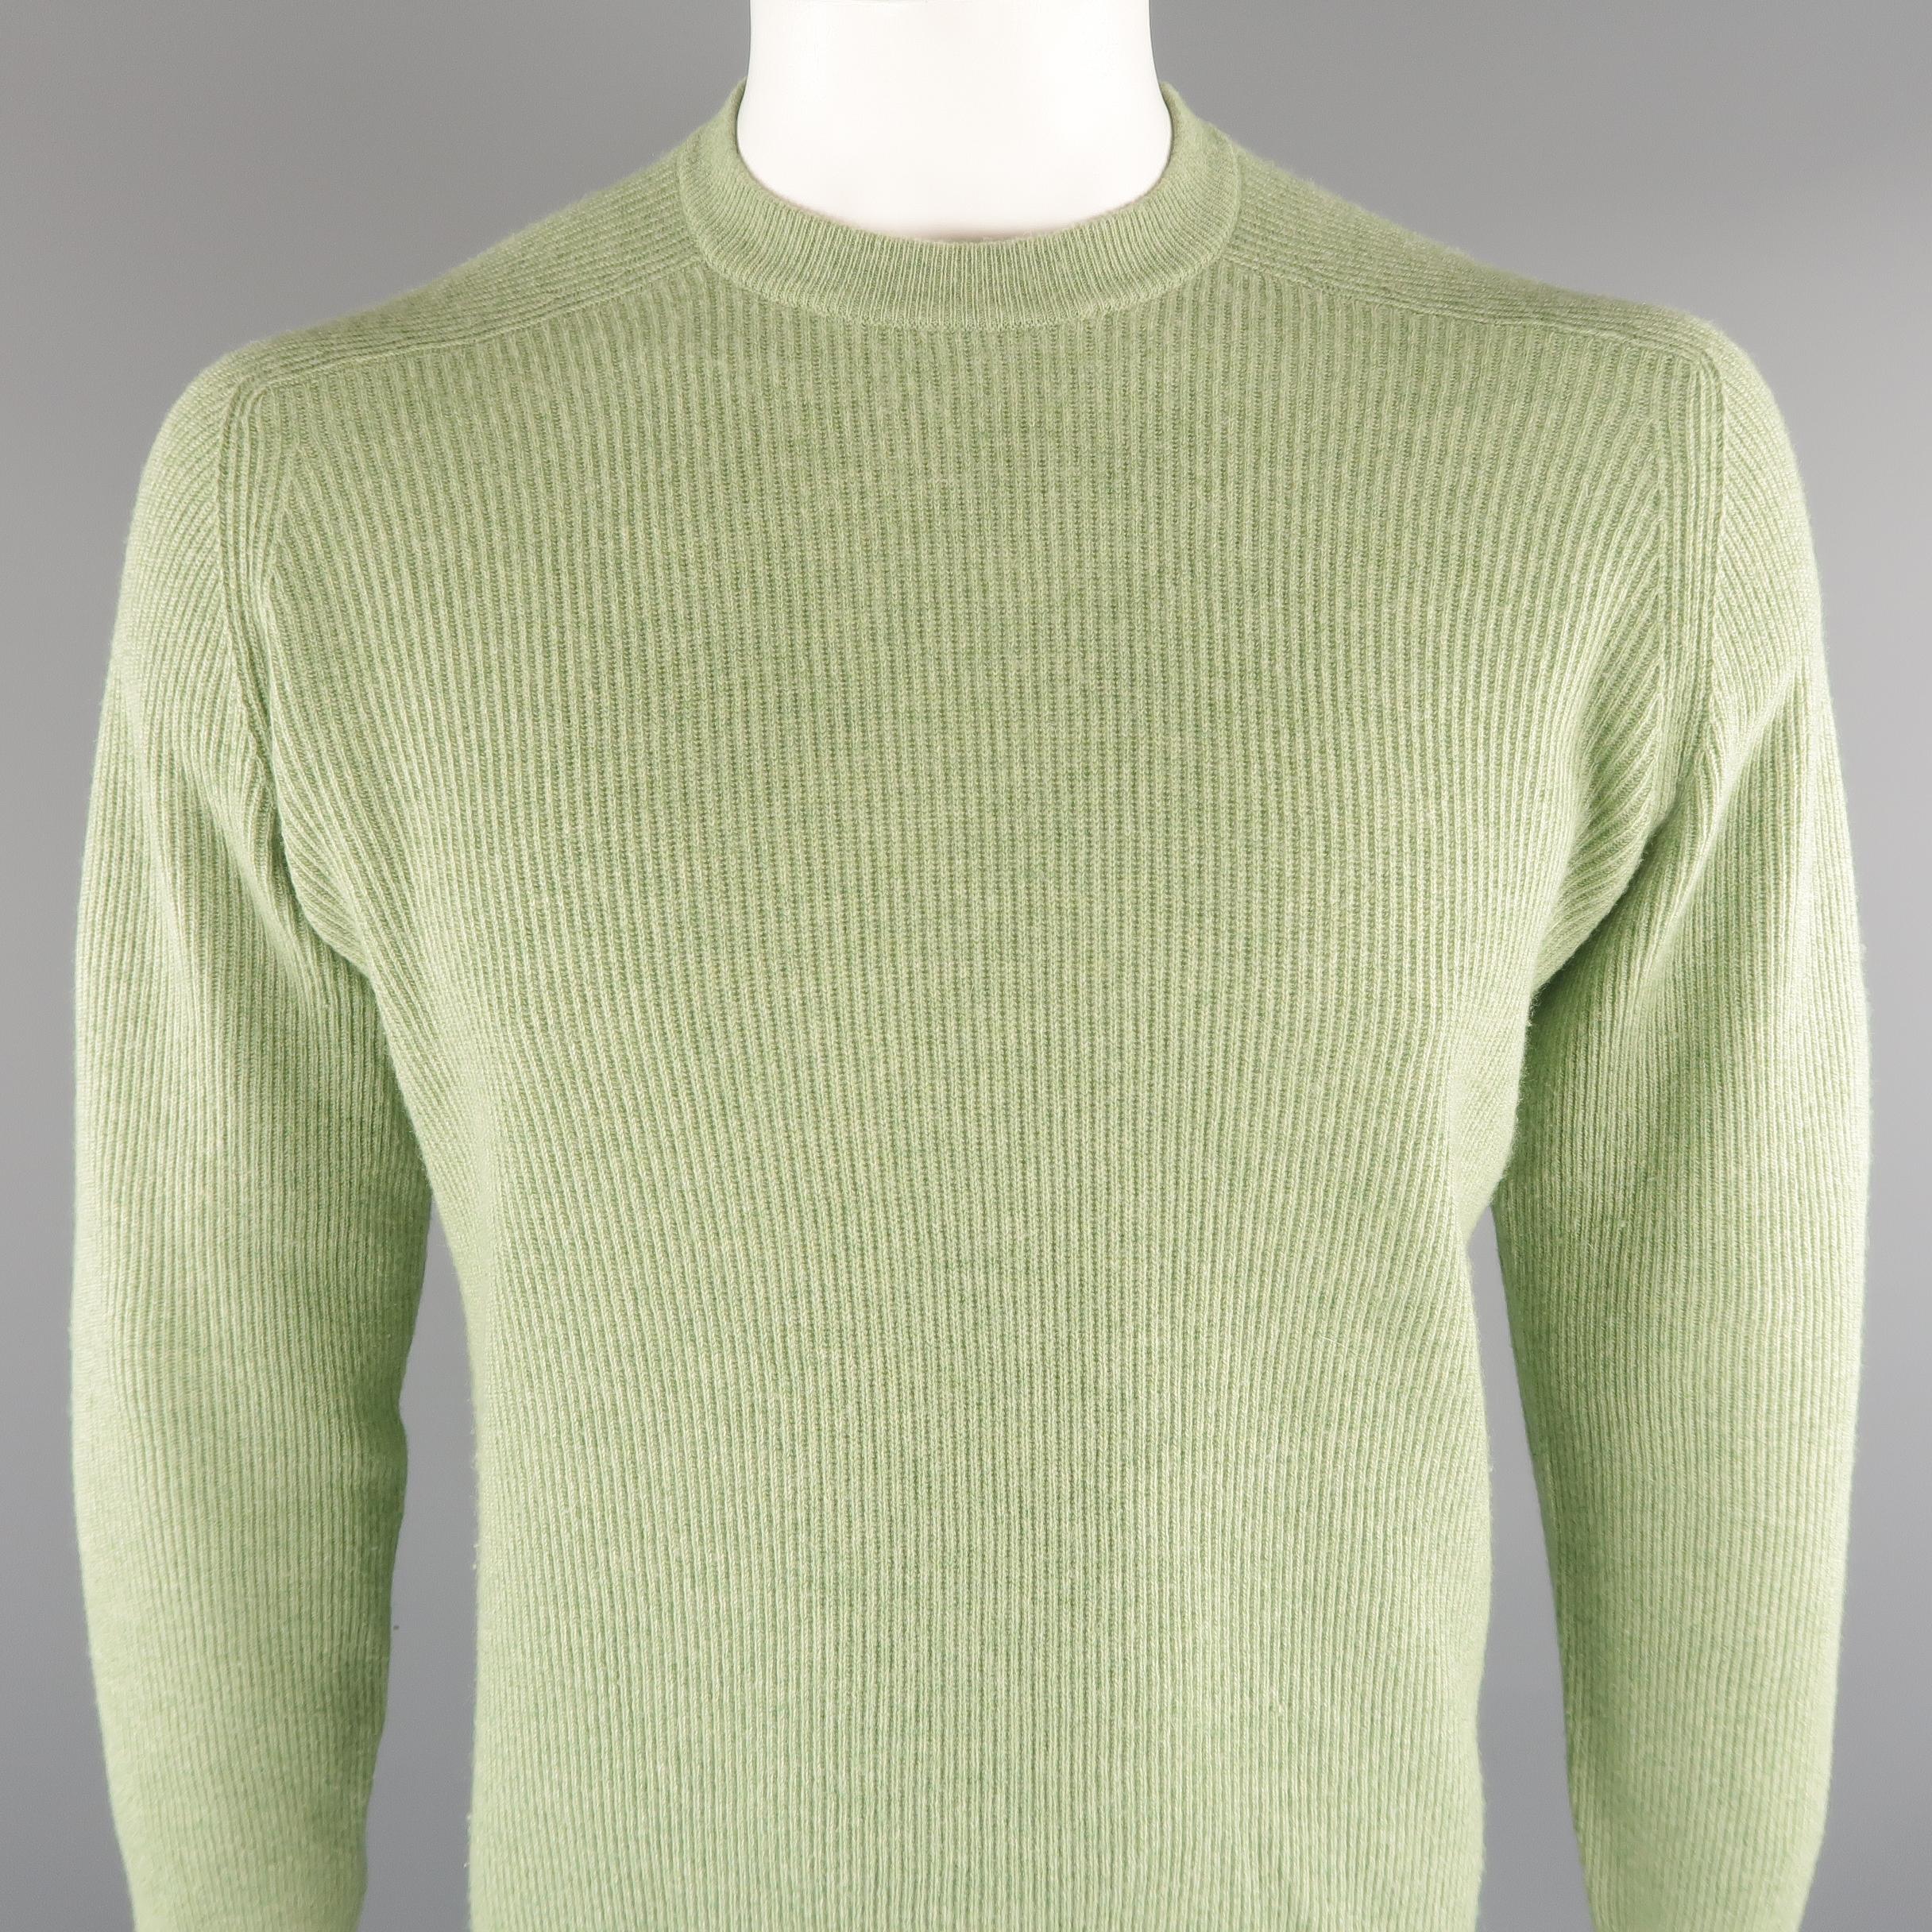 BRUNELLO CUCINELLI sweater comes in 100% cashmere in a green tone, ribbed knit, with a crewneck and ribbed cuff and waistband. Made in Italy.
 
Excellent Pre-Owned Condition.
Marked: 52 IT
 
Measurements:
 
Shoulder: 17 in.
Chest: 46 in.
Sleeve: 26